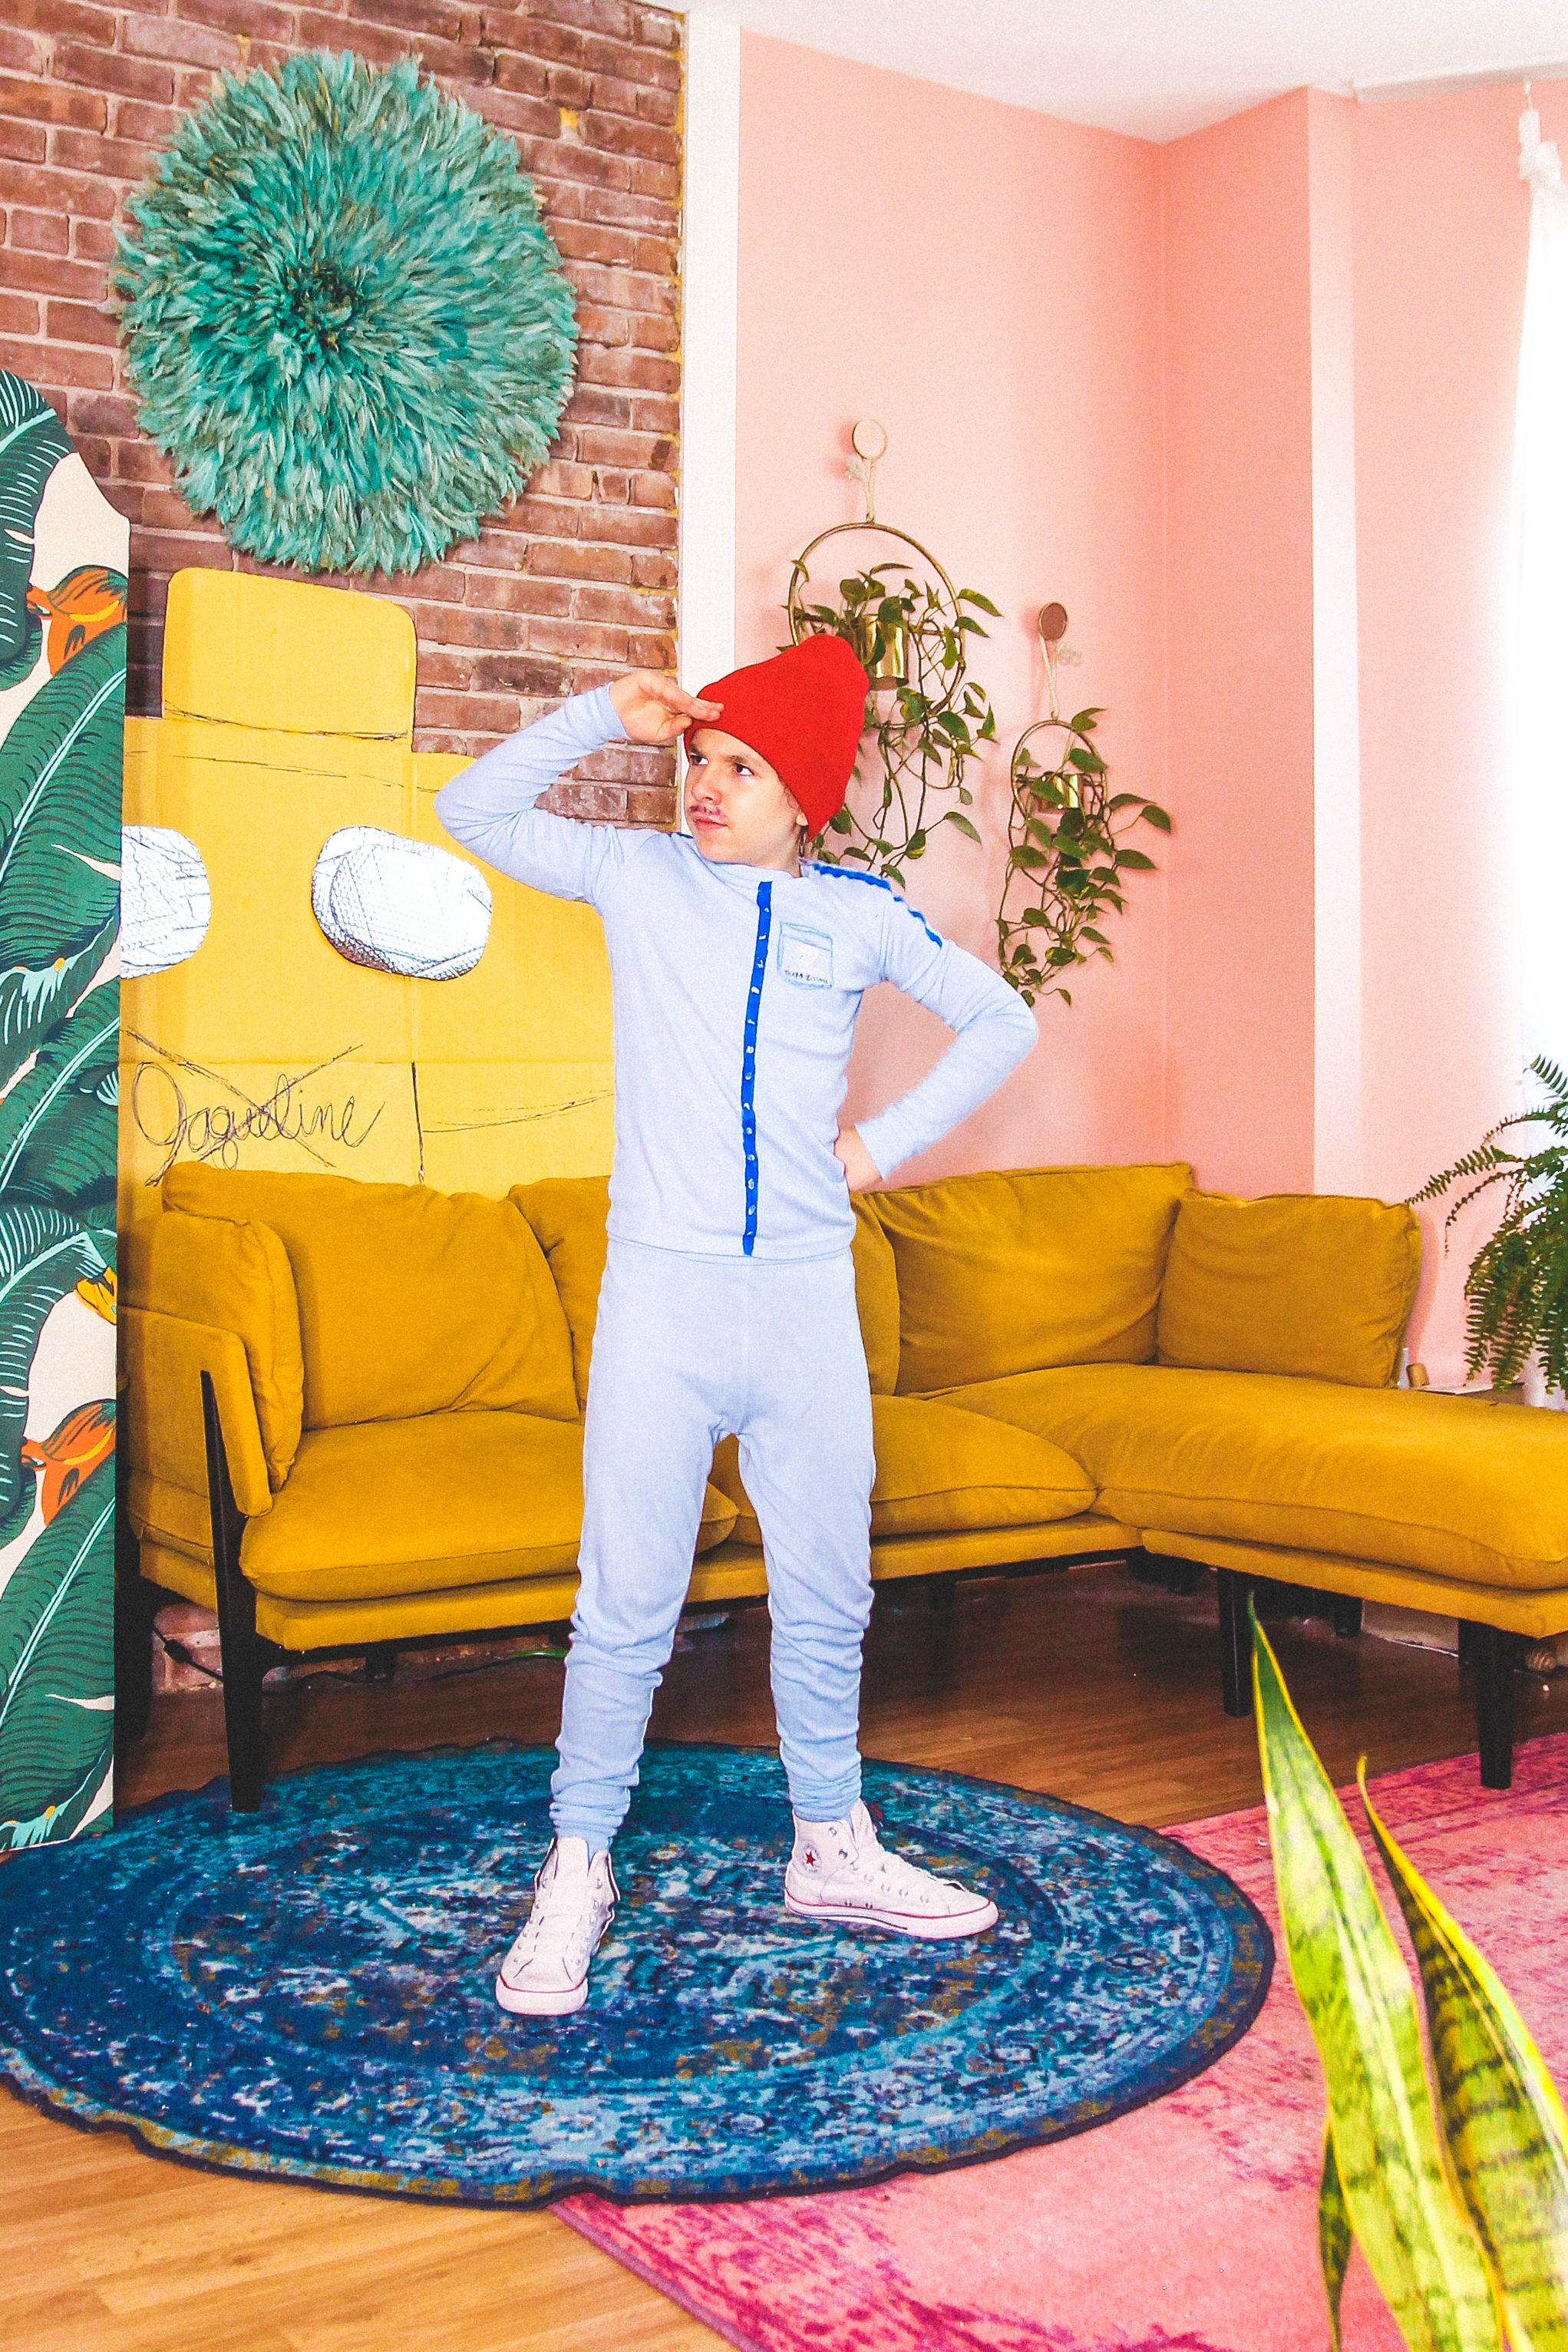 Wes Anderson Halloween Costume Ideas // Wes Anderson Halloween Costumes // Steve Zissou Halloween Costume Ideas // Steve Zissou Group Costume // Group Costume Ideas // DIY Group Costumes // Group Halloween Costume ideas // family halloween costume ideas // diy halloween costume ideas // easy halloween costume ideas // last minute Halloween costume ideas // do it yourself halloween costumes // halloween costume ideas for groups and families // halloween costume ideas // halloween costumes // best halloween costume ideas // team zissou costume ideas // last minute costume ideas // quick and easy halloween costumes ideas // colorful costume ideas // colorful halloween costumes // costume ideas from movies // wes Anderson movie costume ideas // funny costume ideas //